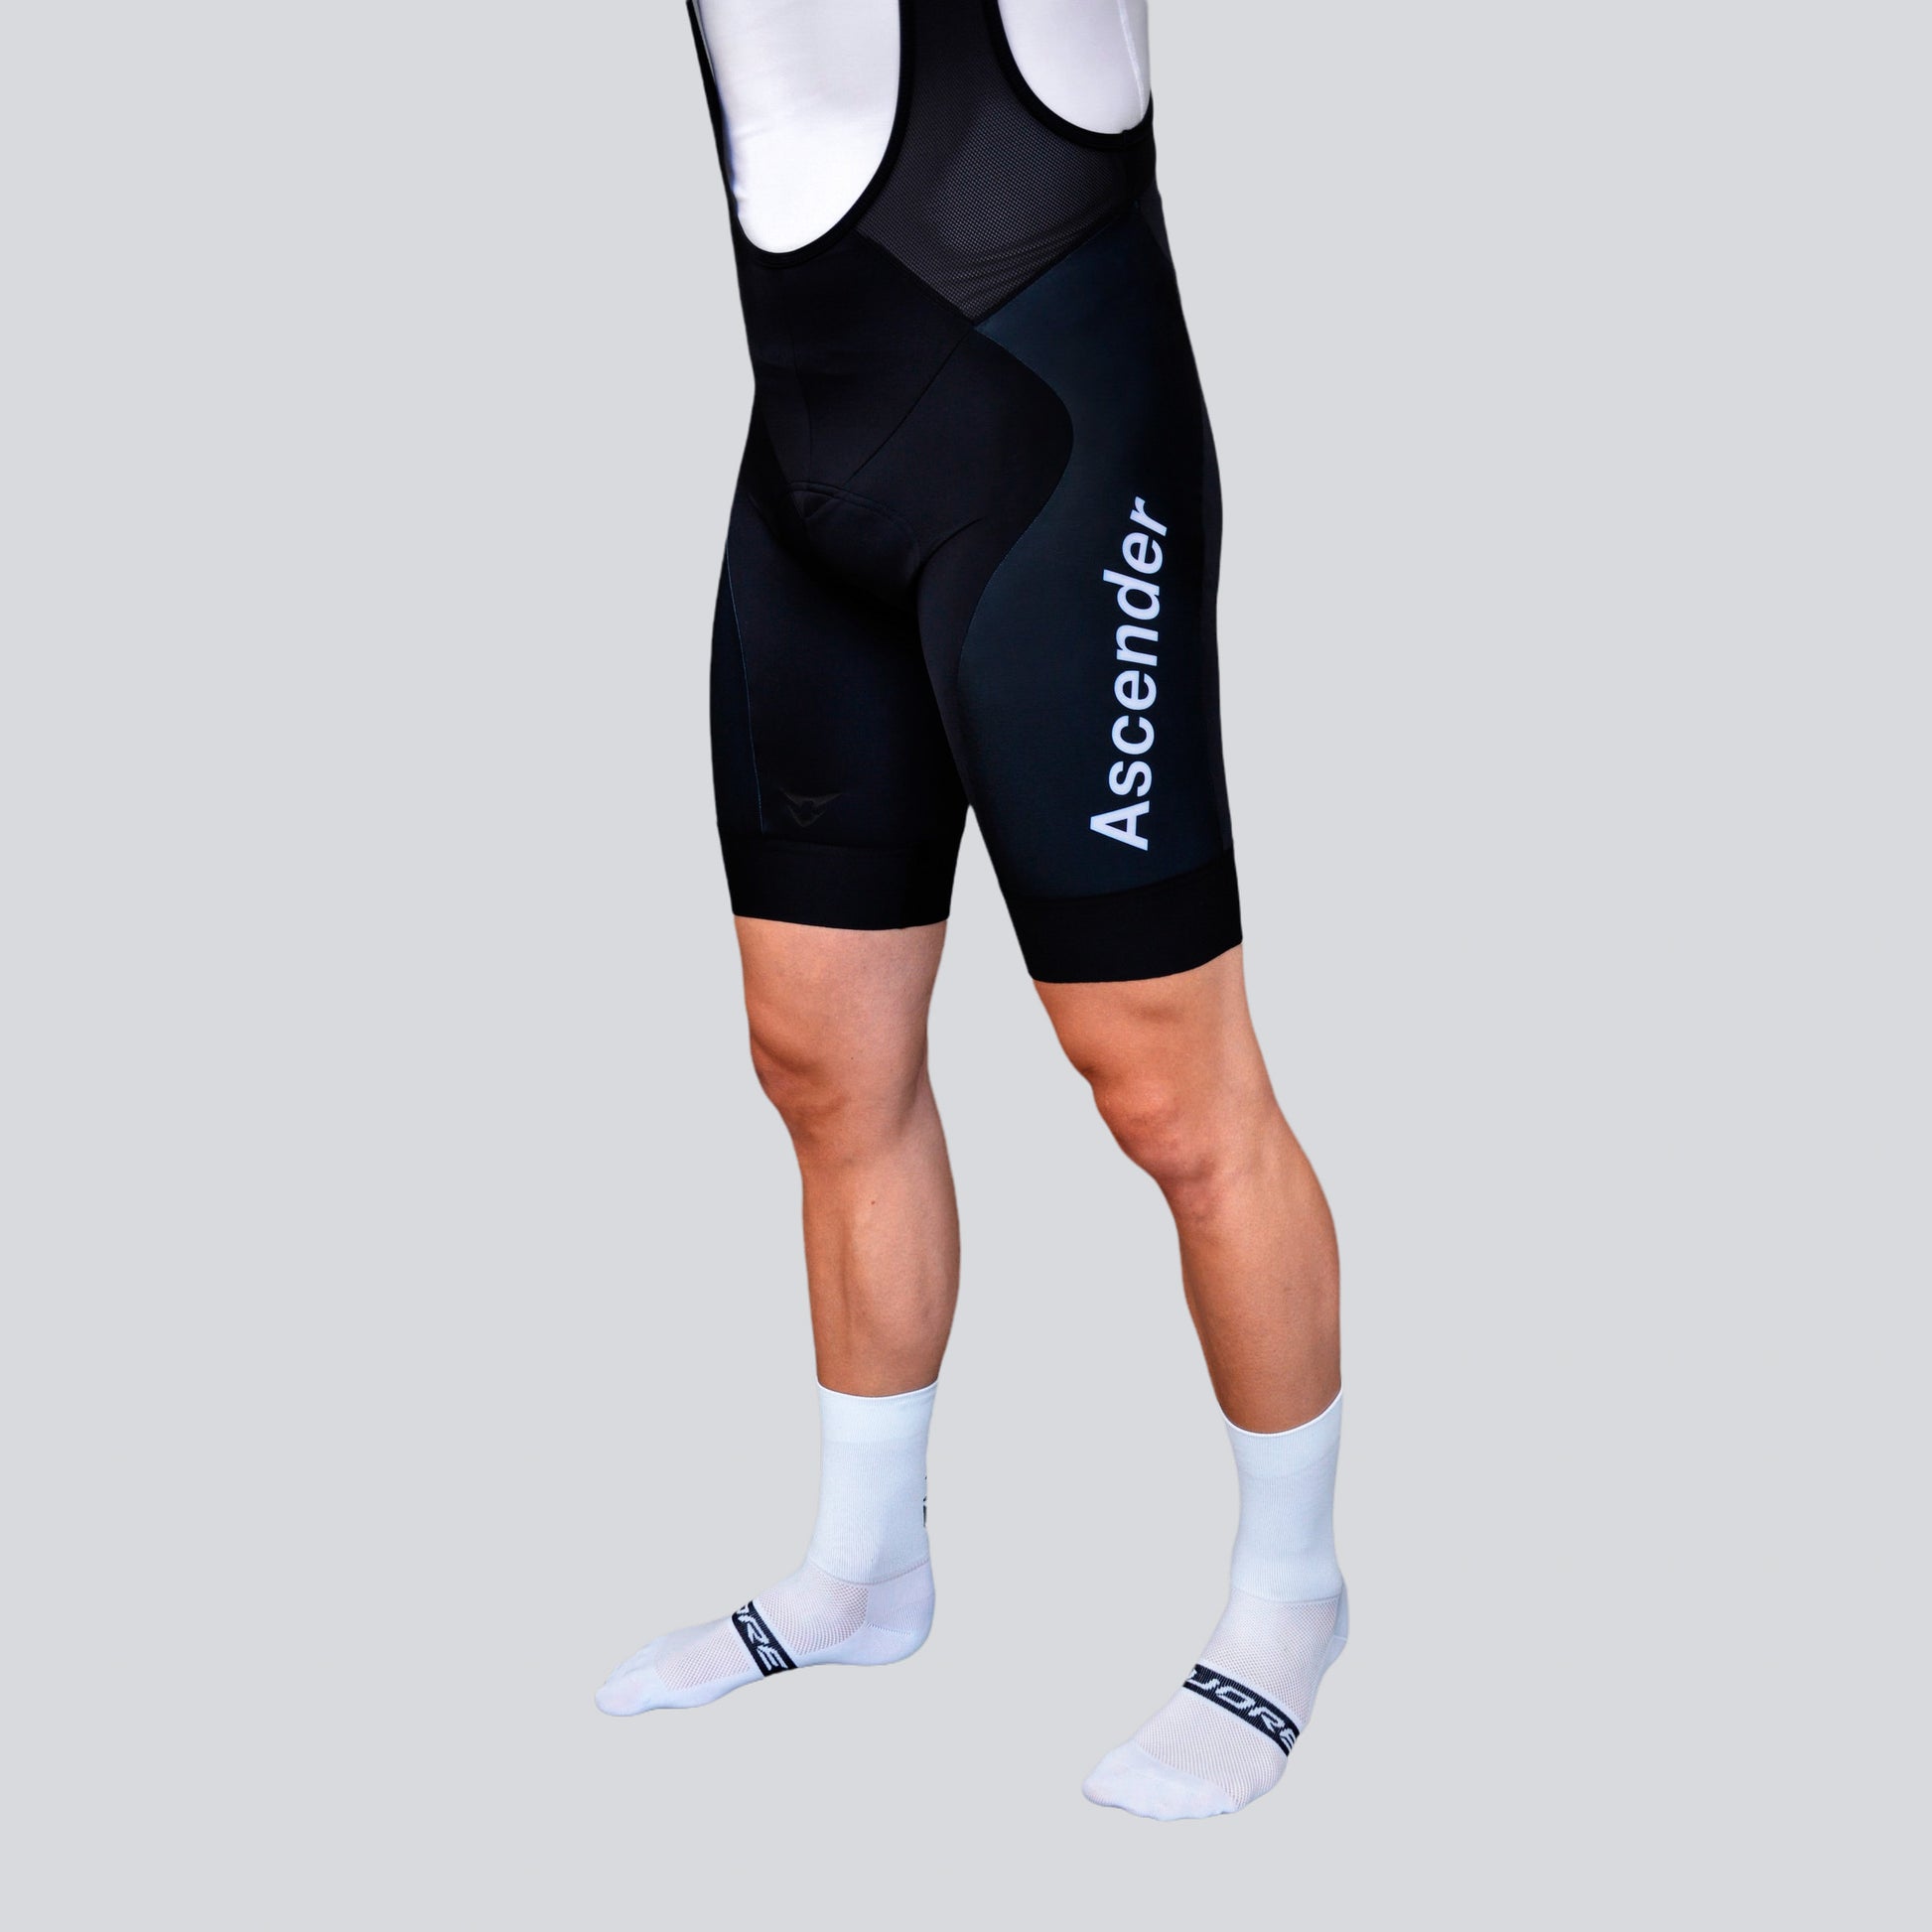 Classic Ascender Black Bib Short from Ascender Cycling Club Side View Zoom Monogram